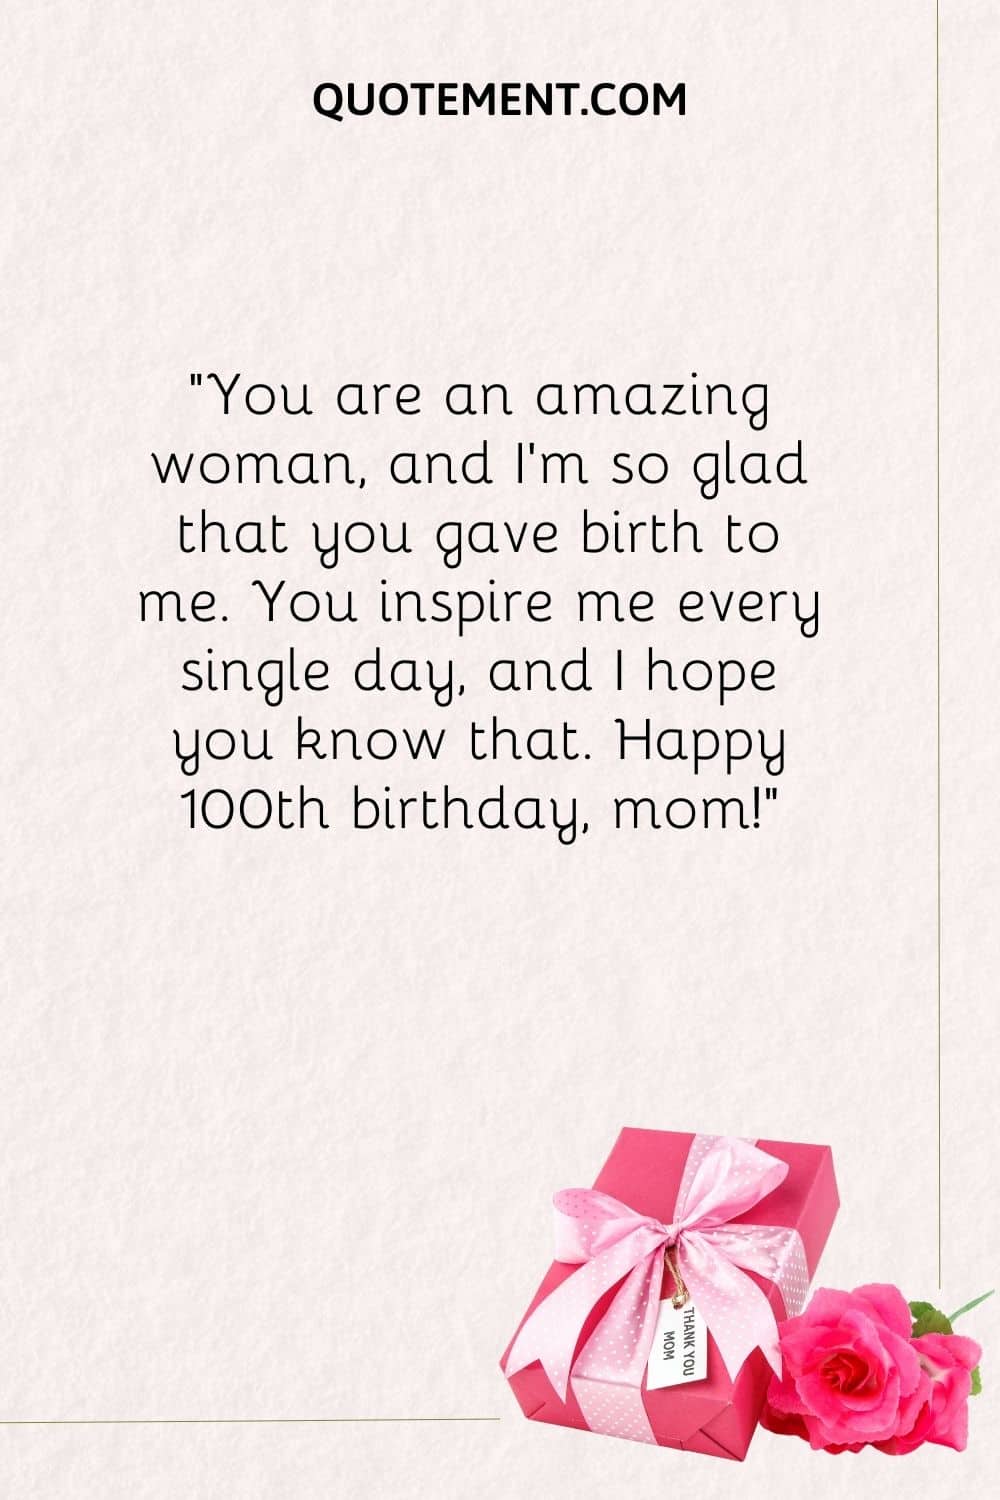 You are an amazing woman, and I’m so glad that you gave birth to me.